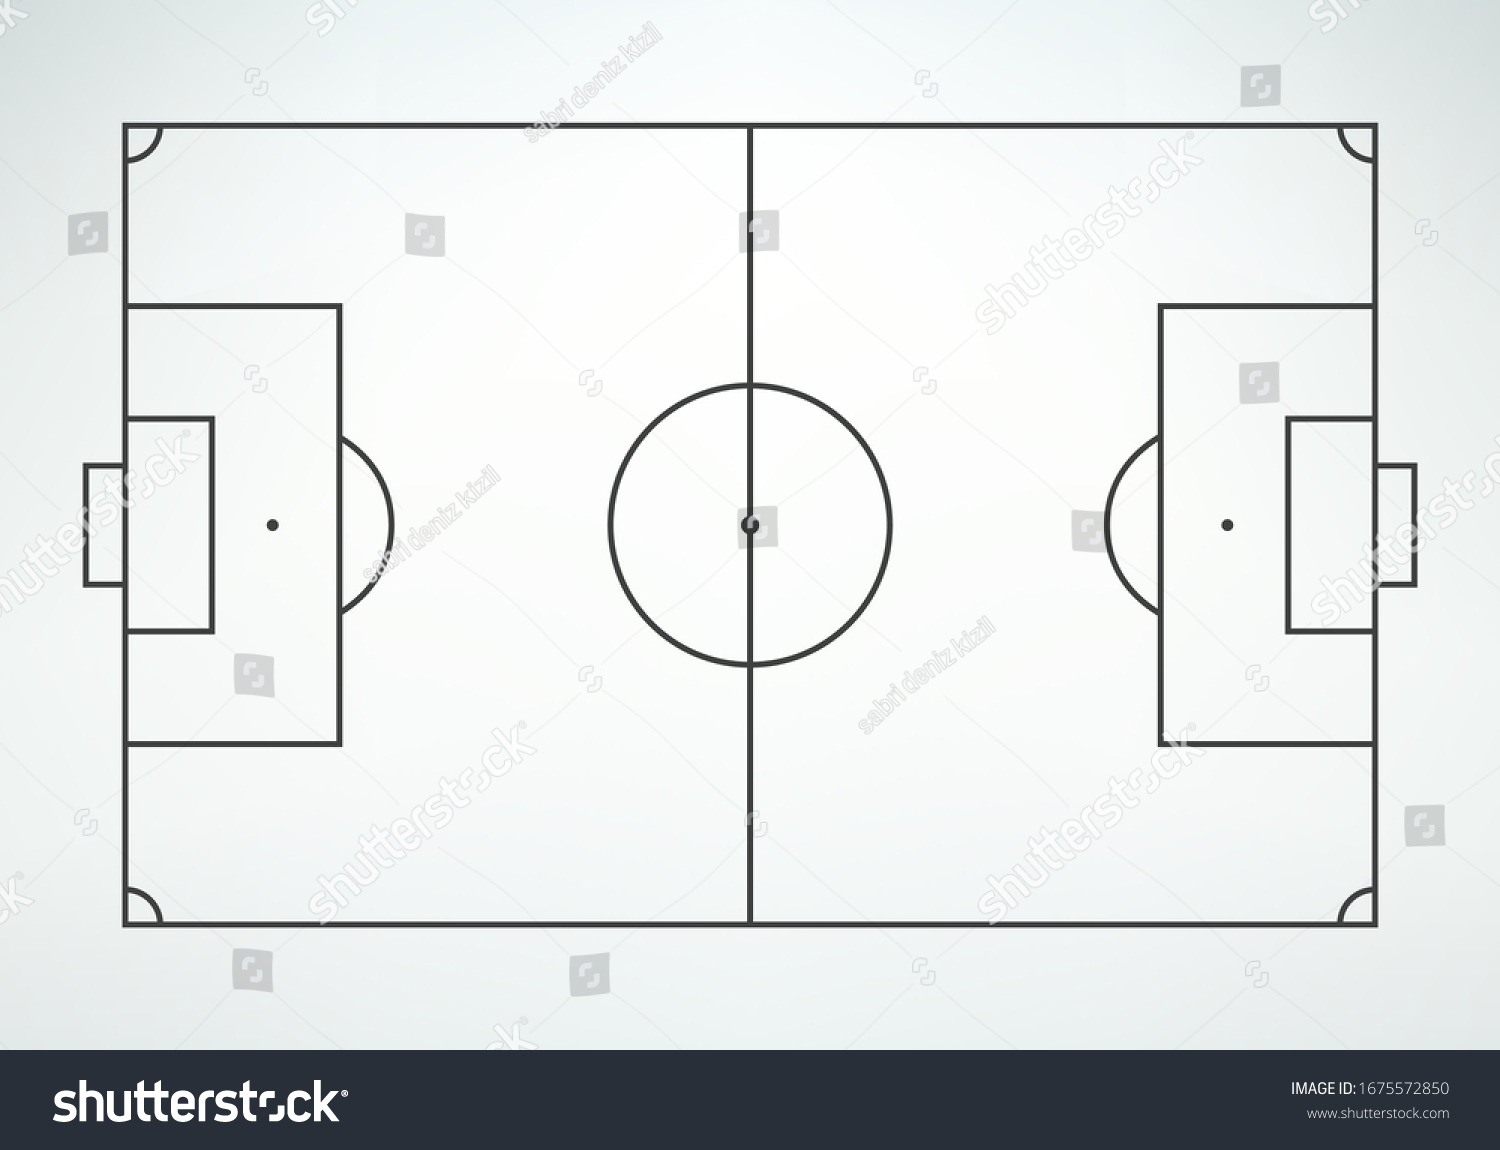 Soccer field in line style. Football field on white background. Top view. #1675572850